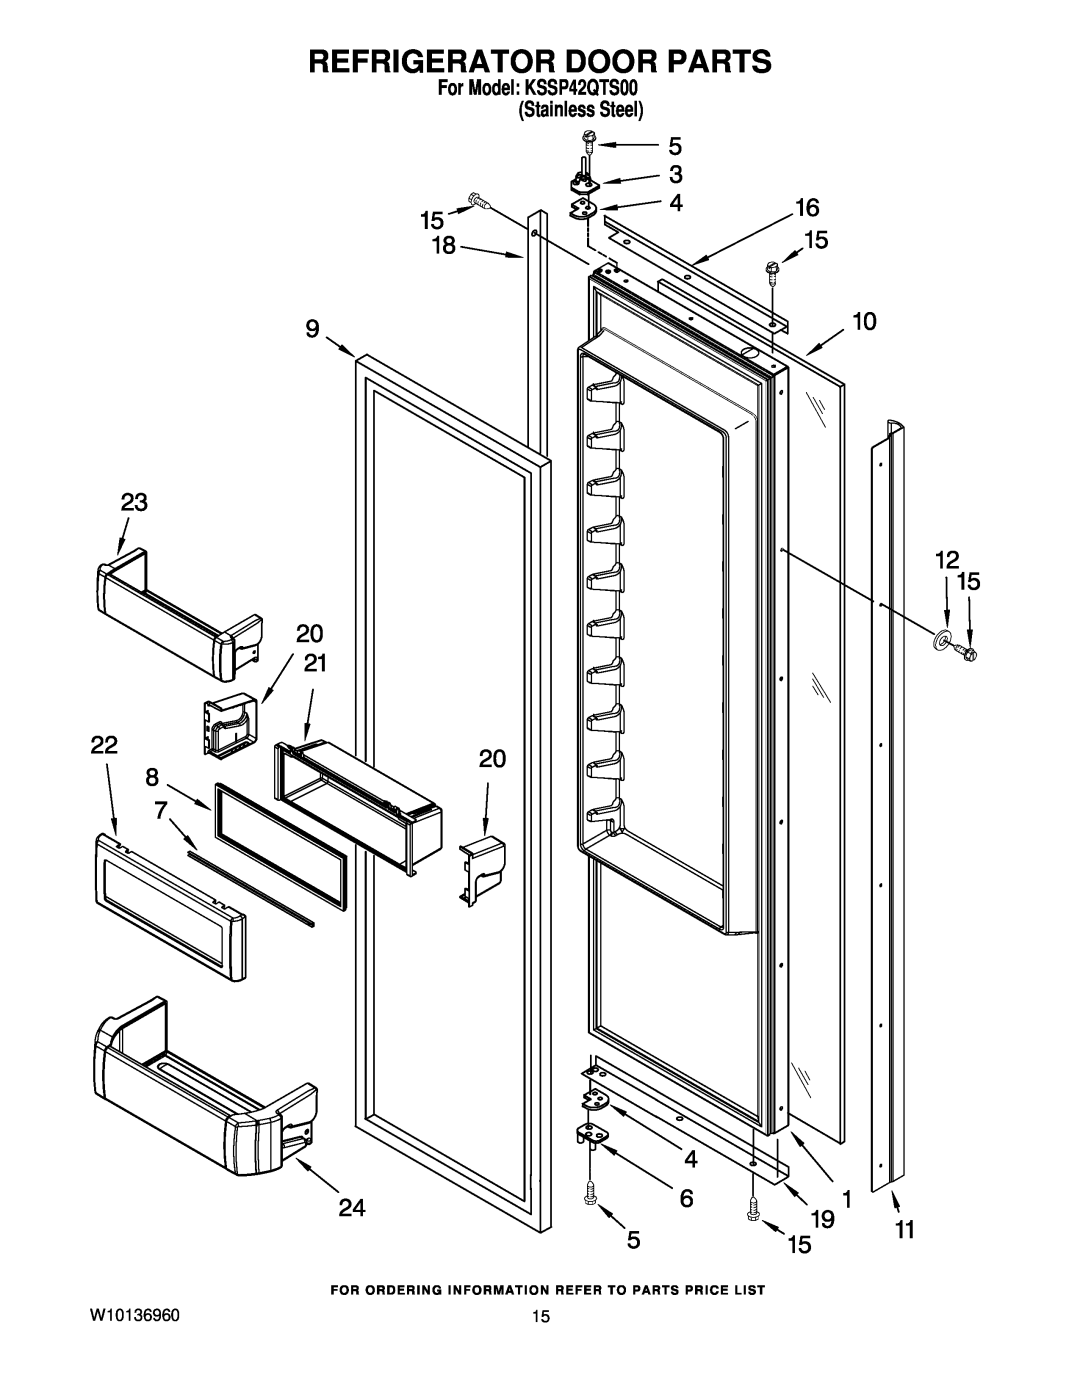 KitchenAid manual Refrigerator Door Parts, W10136960, For Model KSSP42QTS00 Stainless Steel 